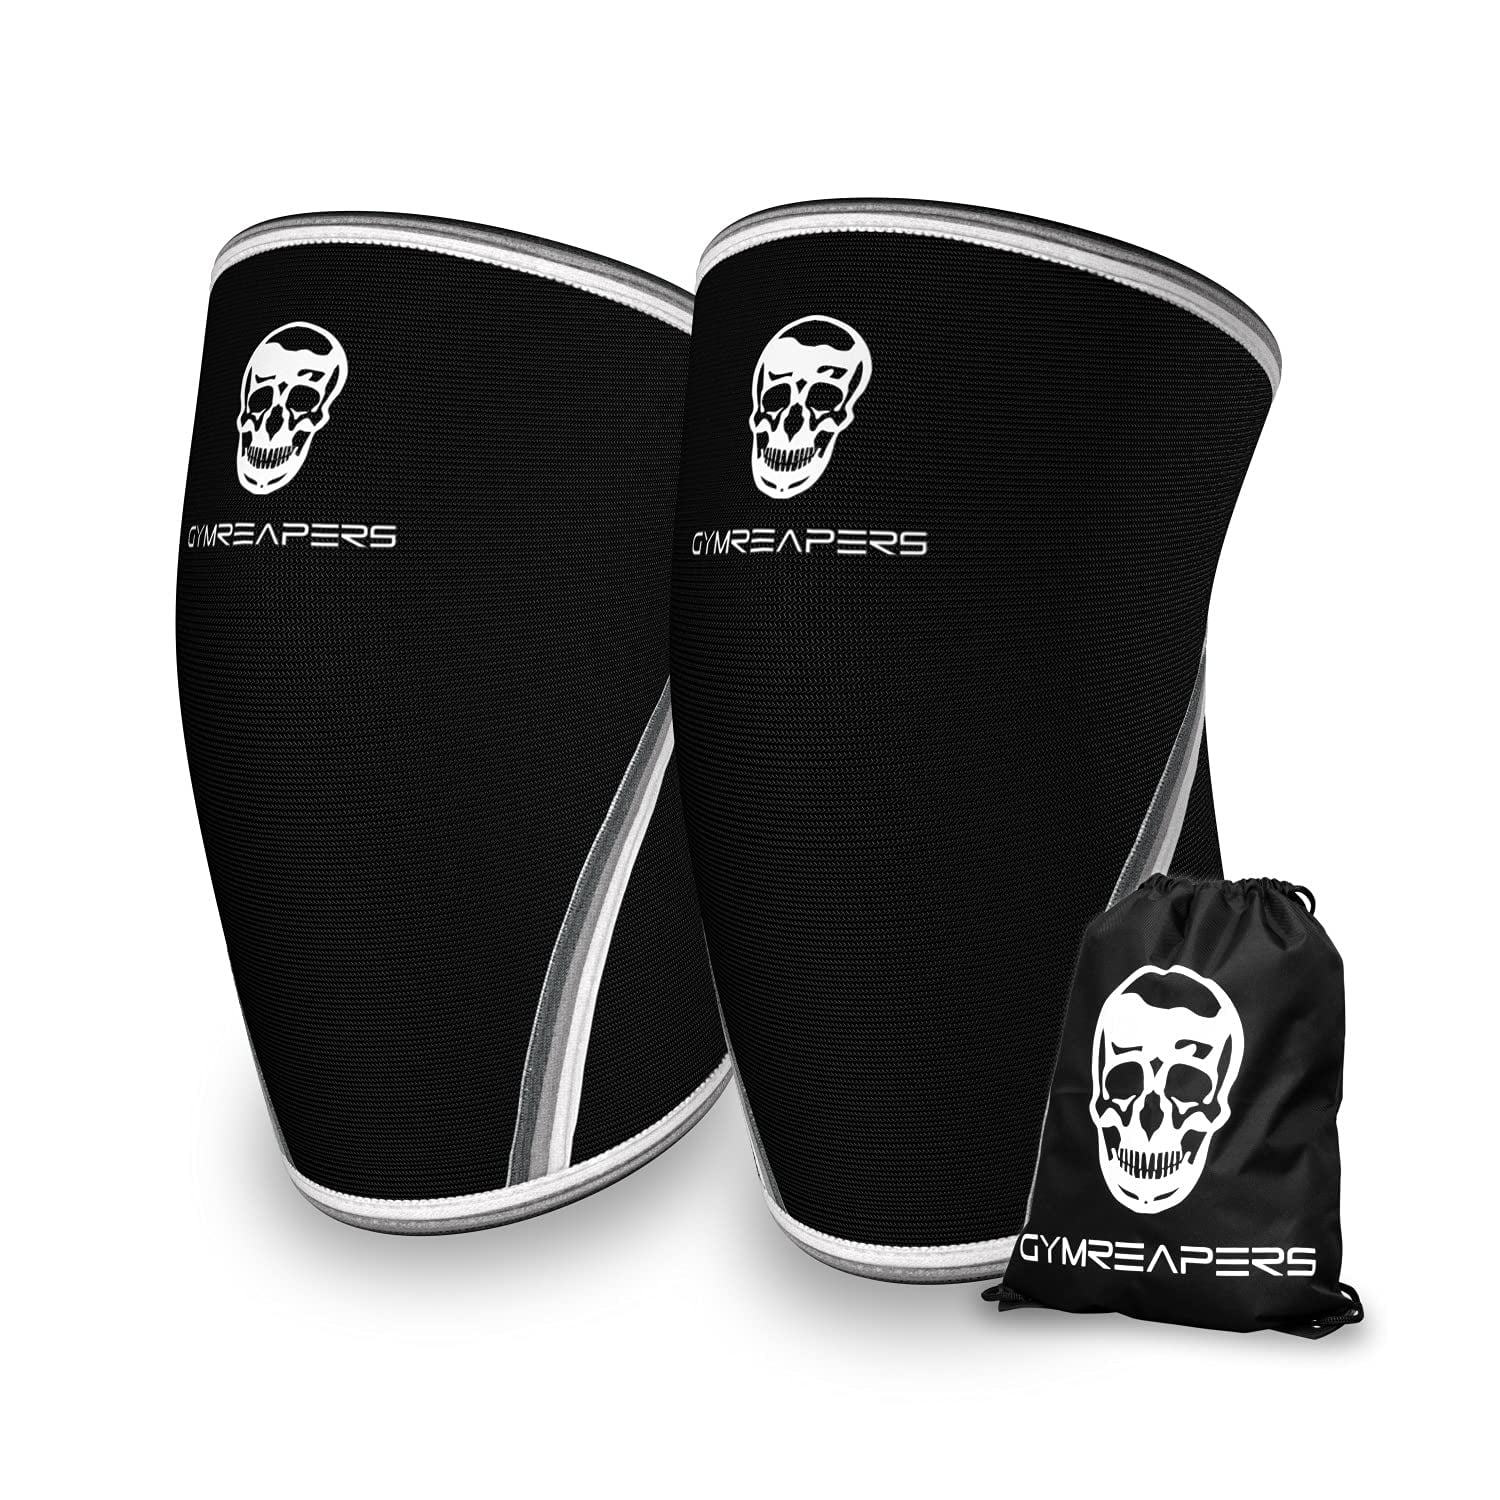 Knee Sleeves & Compression Brace (1 Pair) With Gym Bag - IPF Approved - for  Squats, Fitness, Weightlifting, and Powerlifting - Gymreapers 7MM Sleeve  Pair 